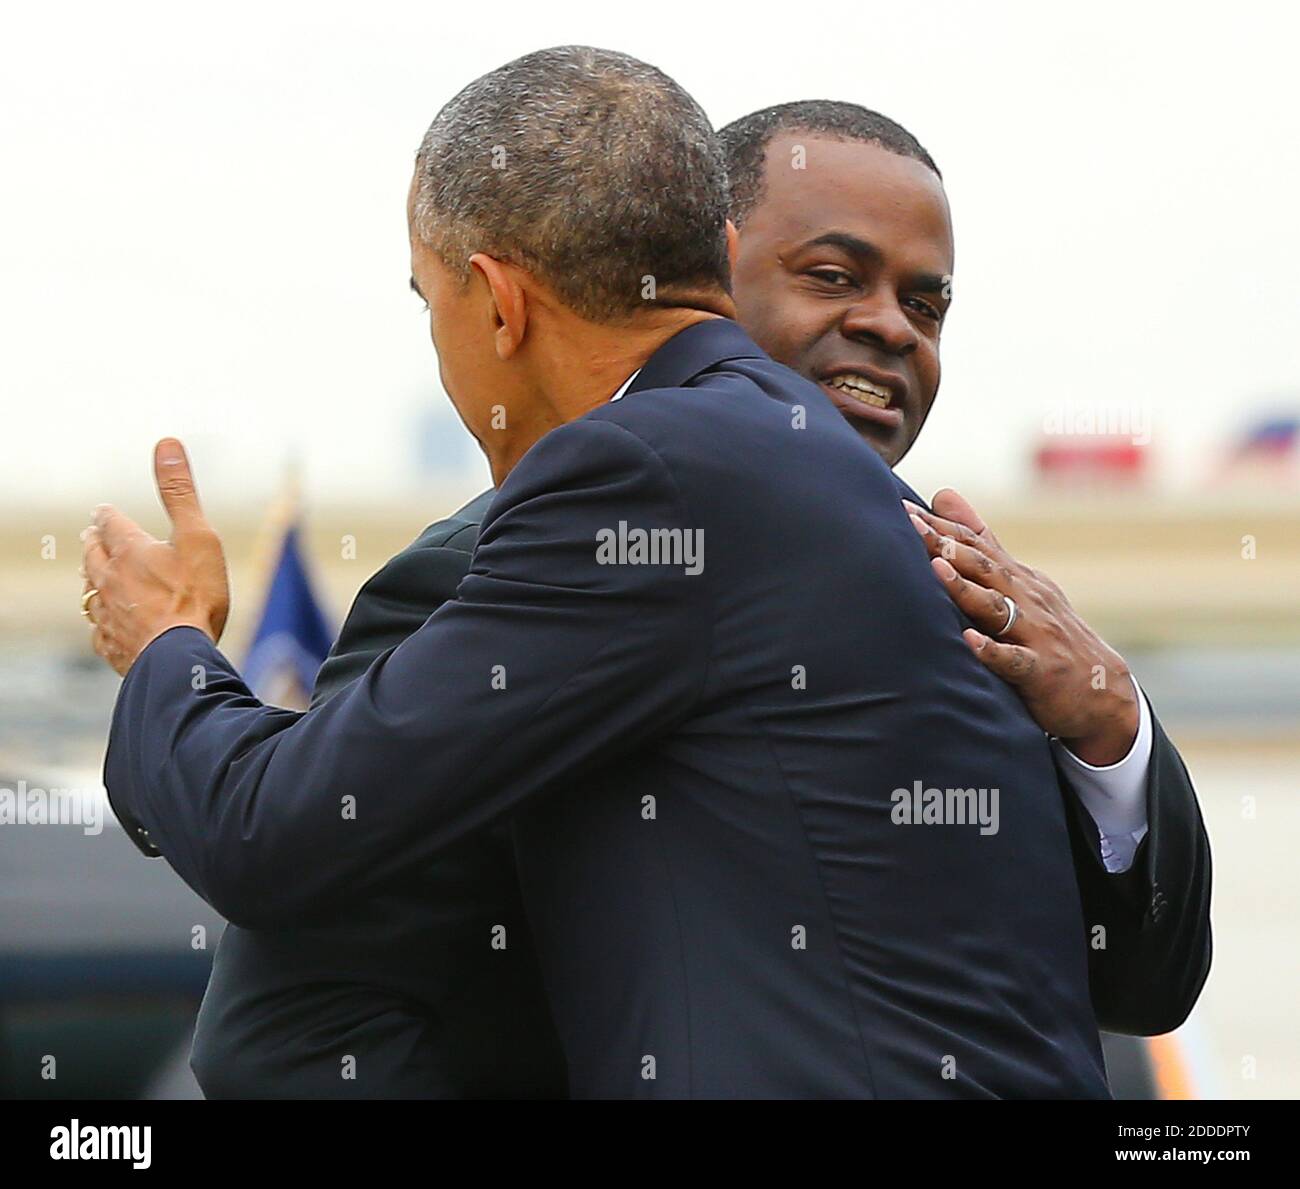 NO FILM, NO VIDEO, NO TV, NO DOCUMENTARY - Mayor Kasim Reed hugs President Barack Obama as he arrives at the airport on Tuesday, March 10, 2015, in Atlanta, GA, USA. Photo by Curtis Compton/Atlanta Journal-Constitution/TNS/ABACAPRESS.COM Stock Photo